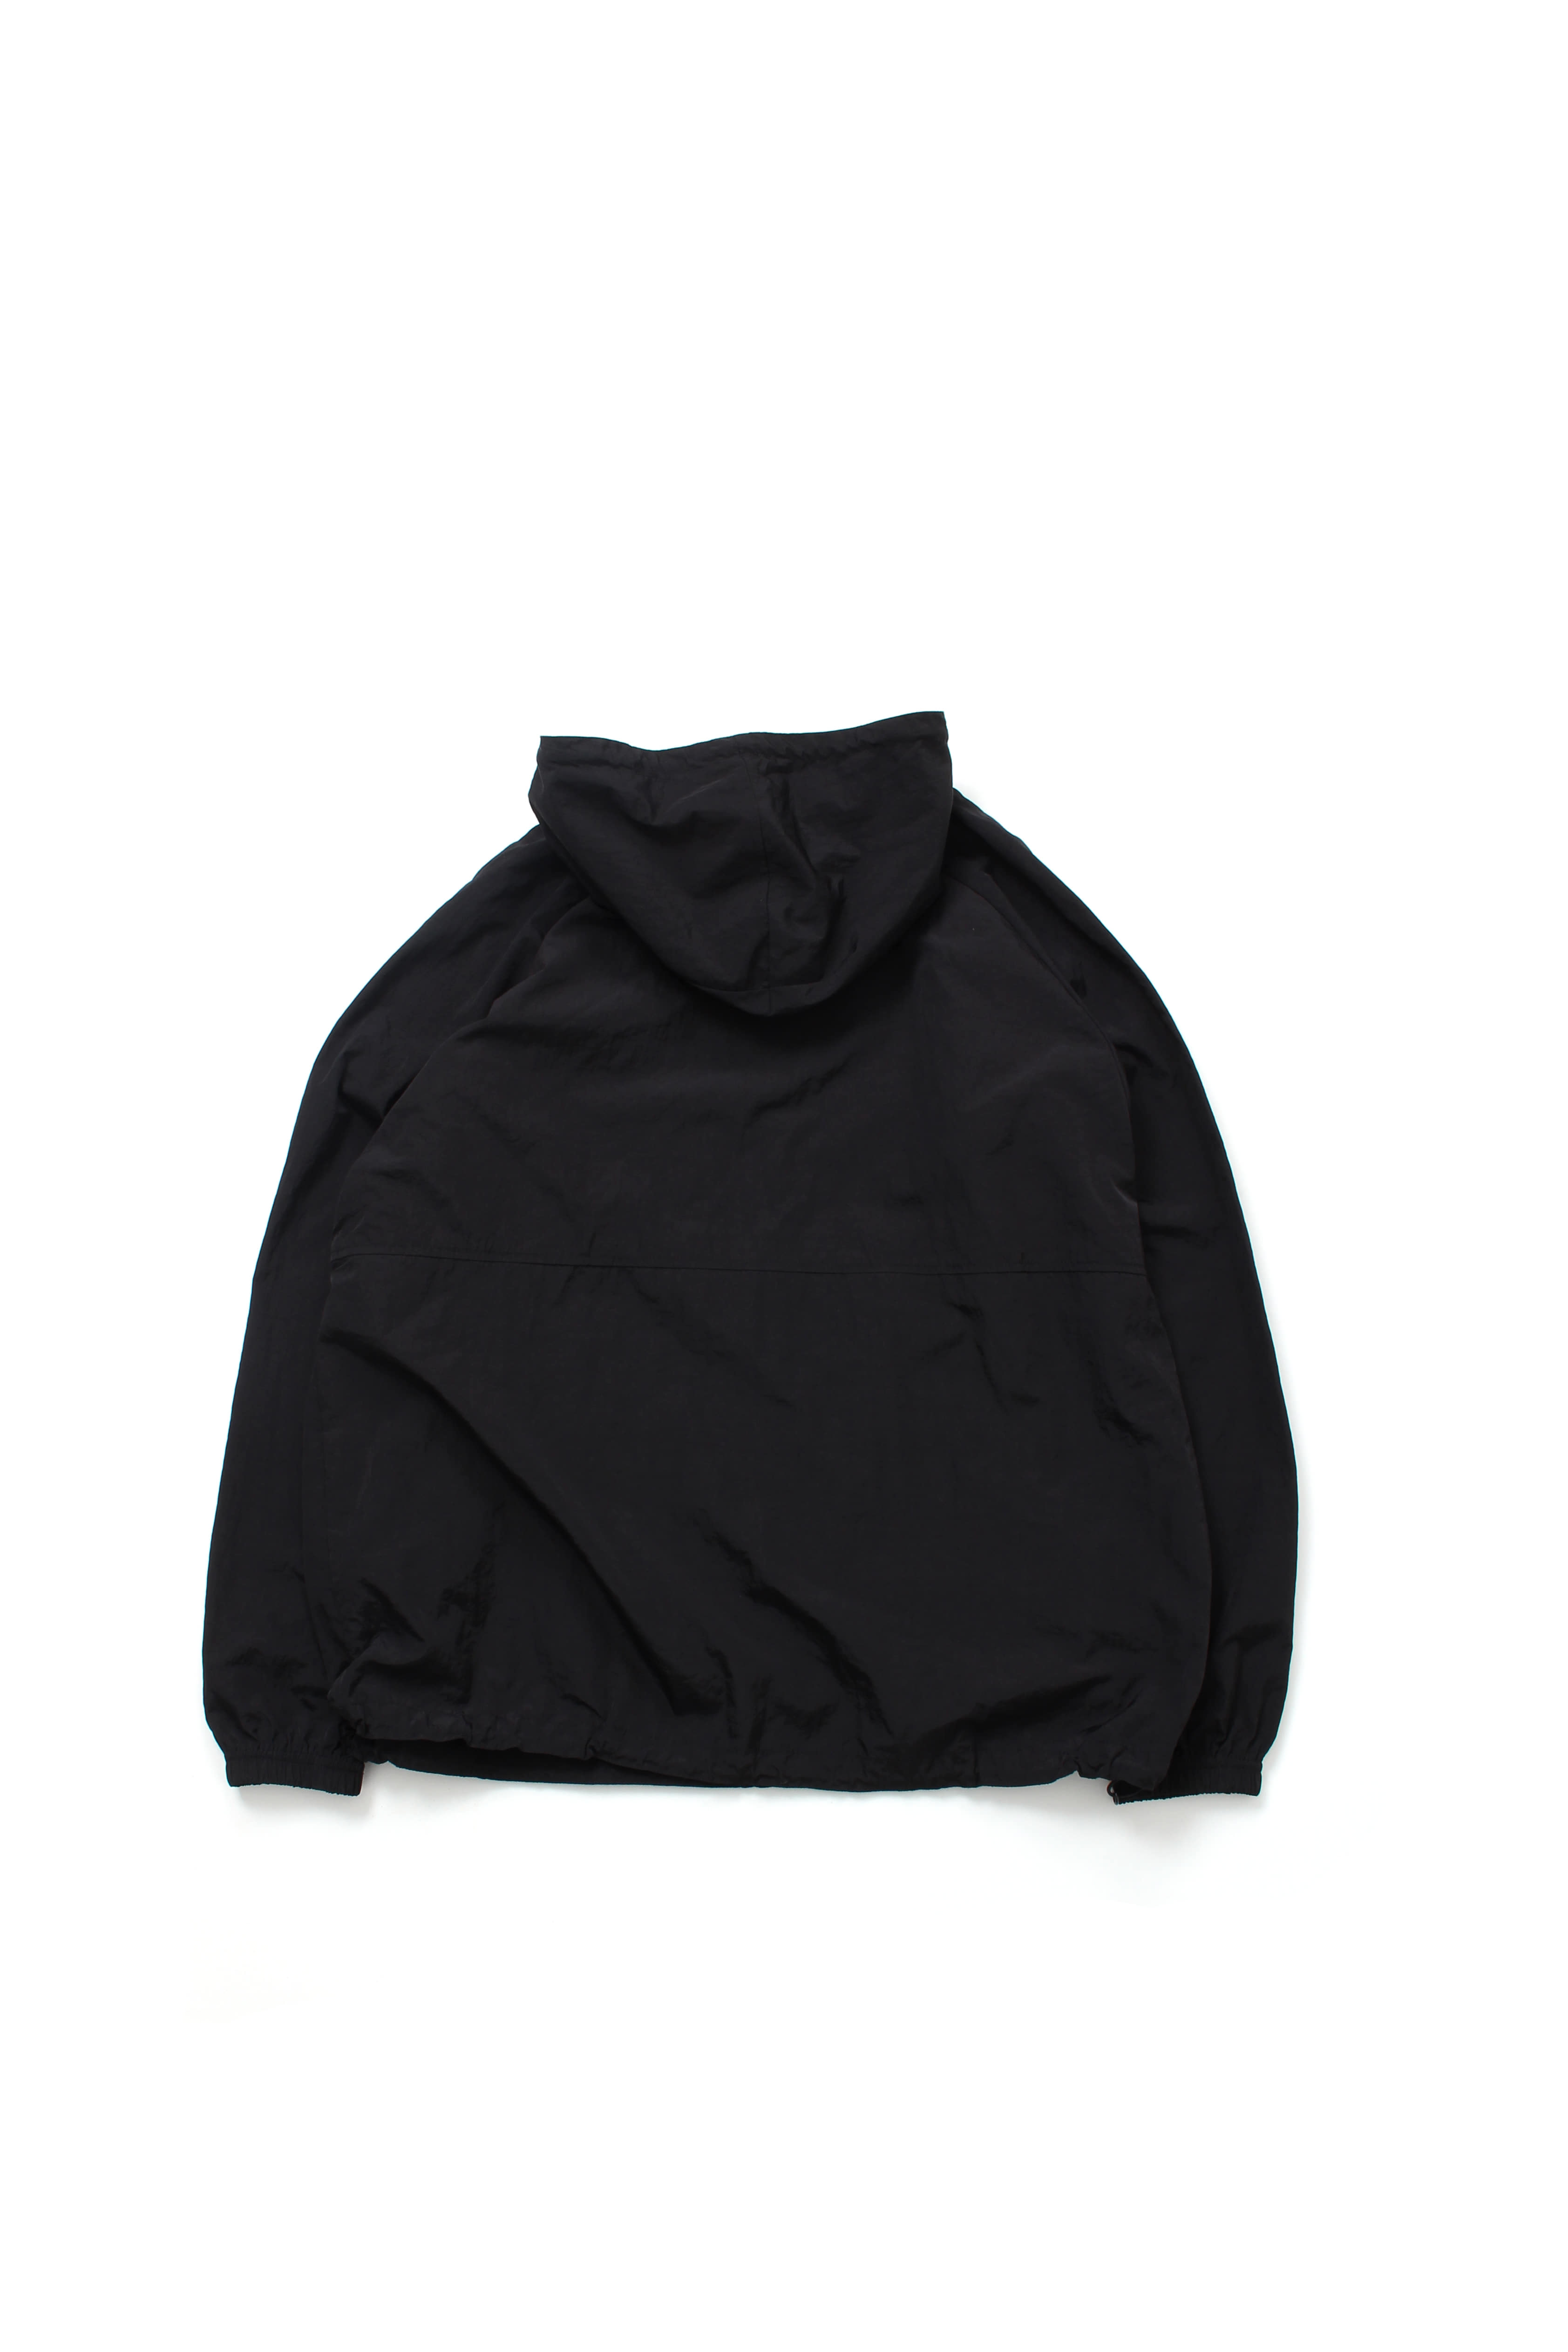 BEAMS x RUSSELL ATHLETIC Anorak